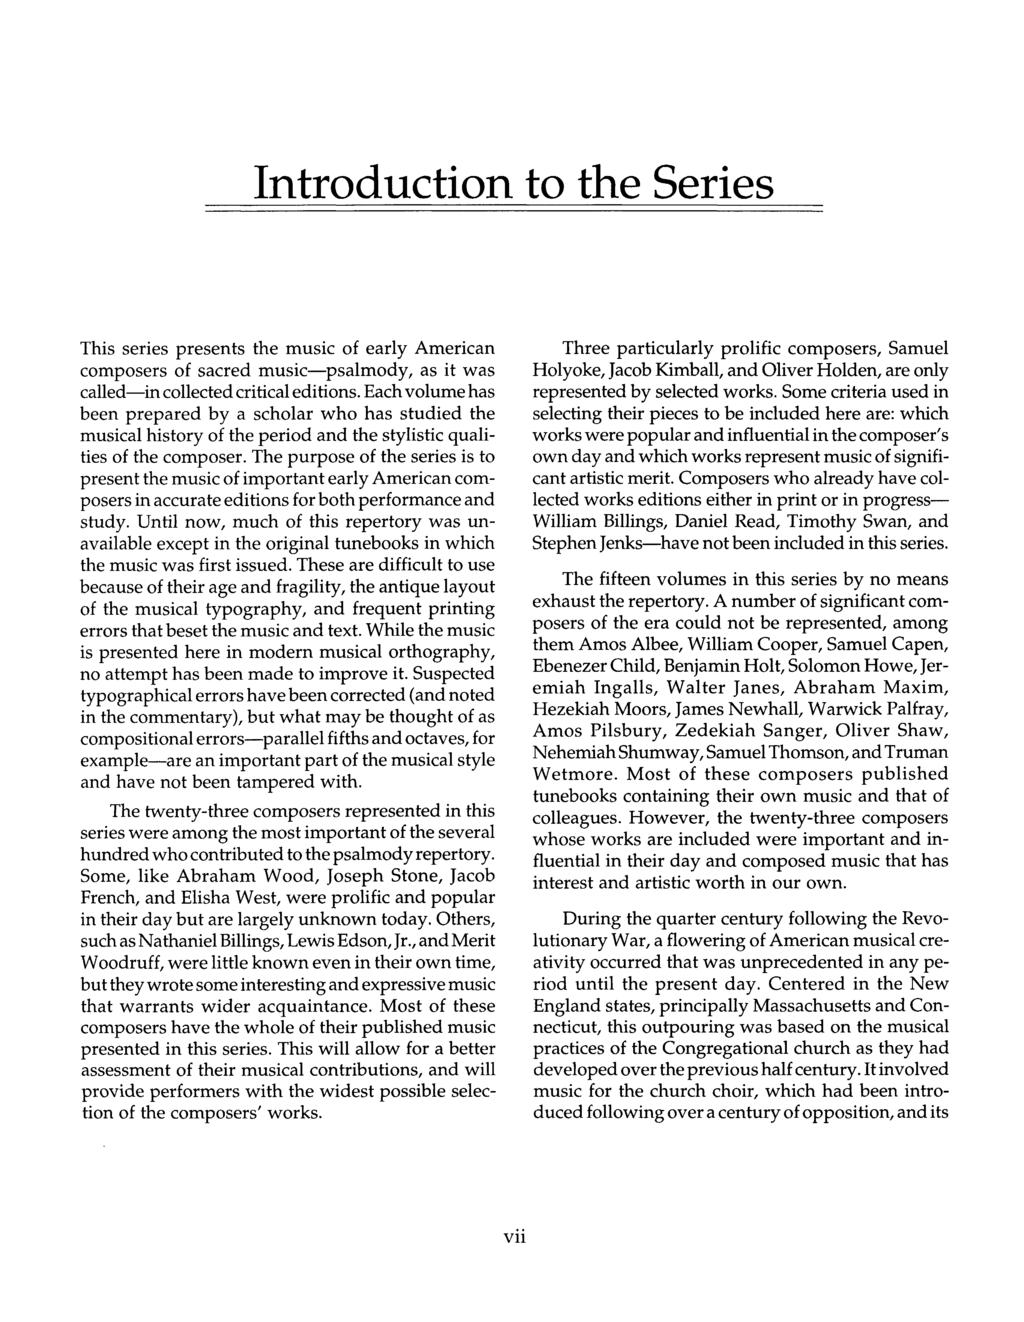 Introduction to the Series This series presents the usic of early Aerican coposers of sacred usic psalody, as it was called in collected critical editions.